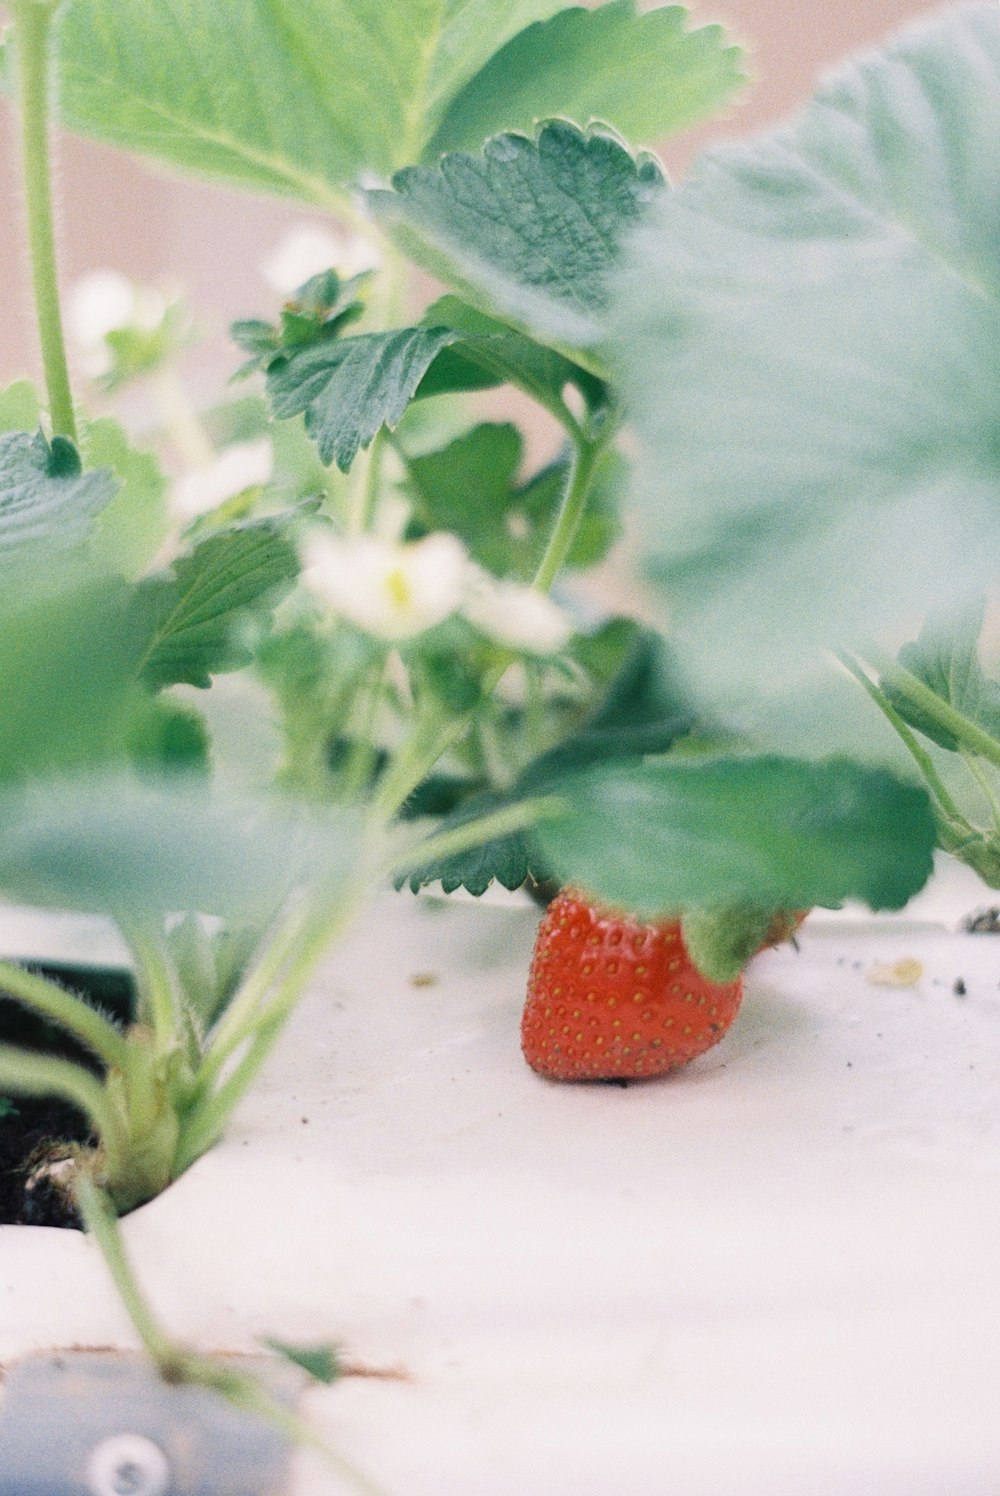 a close up of a strawberry plant with leaves